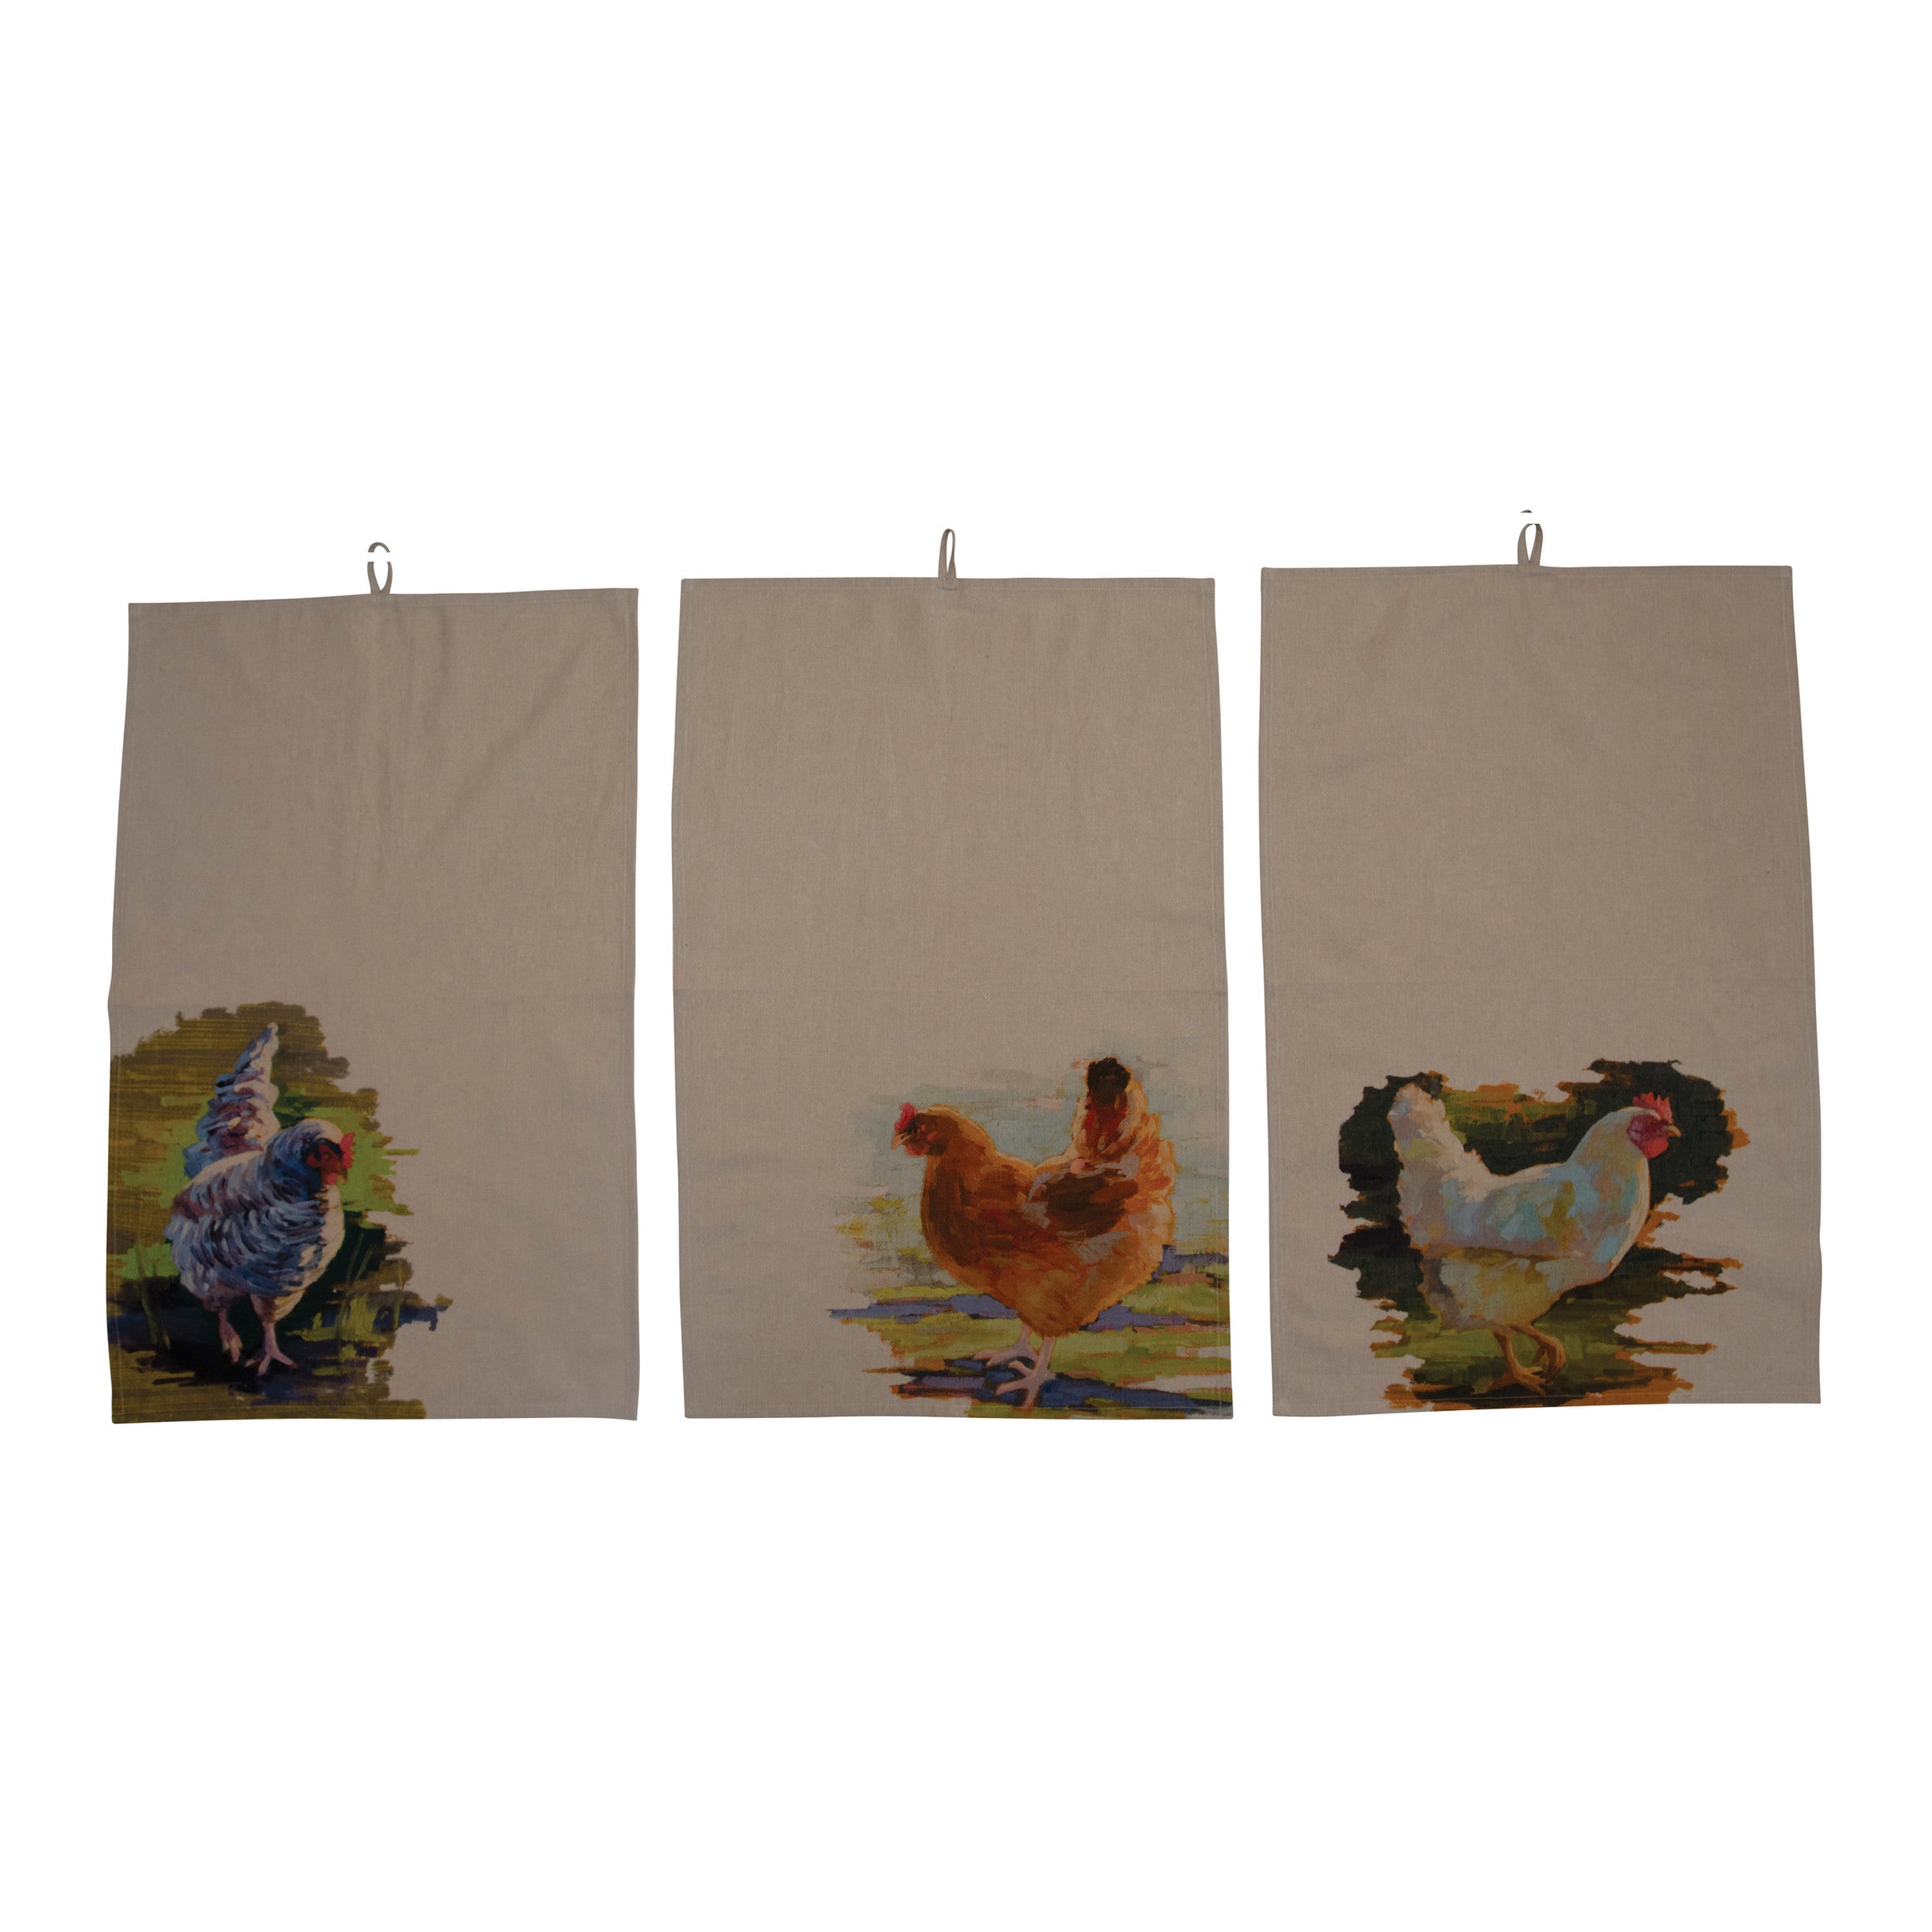 Cotton Chambray Tea Towel, Chicken Image, 3 Styles